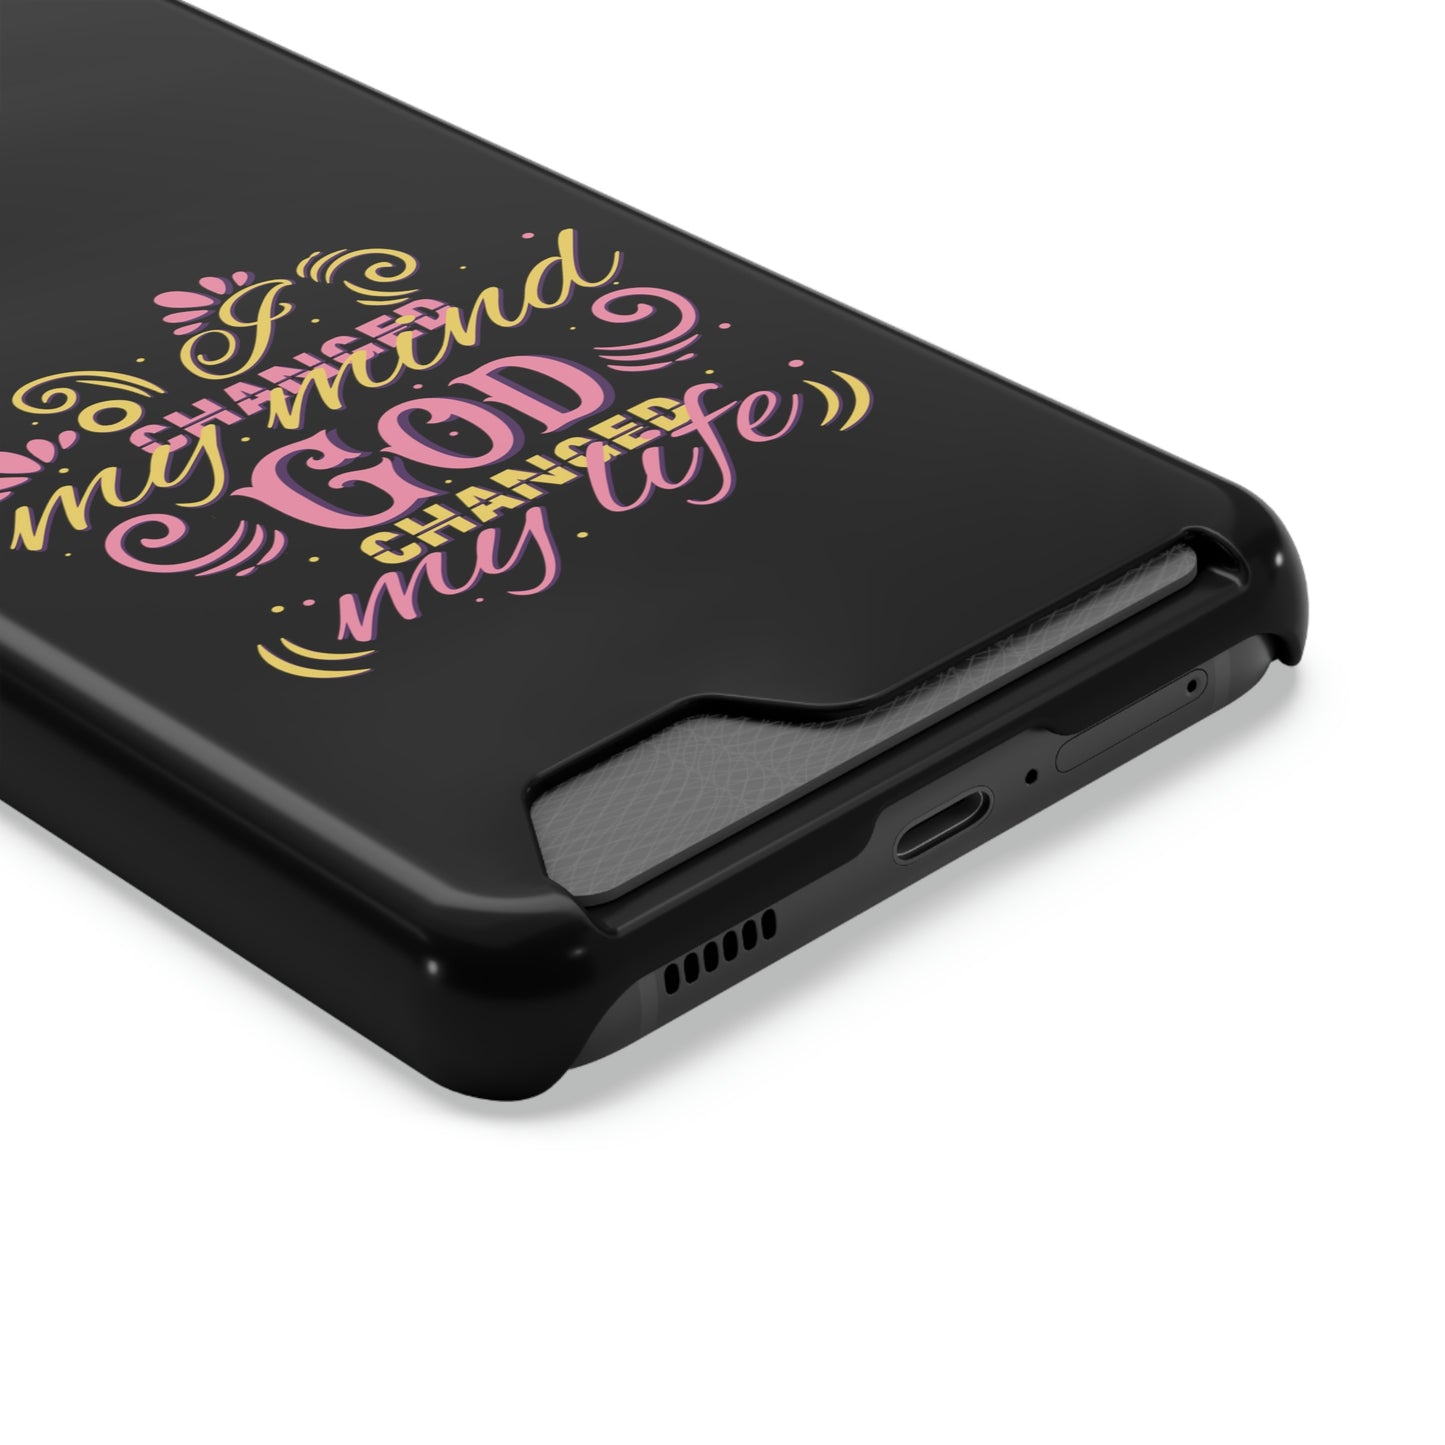 I Changed My Mind God Changed My Life Phone Case With Card Holder